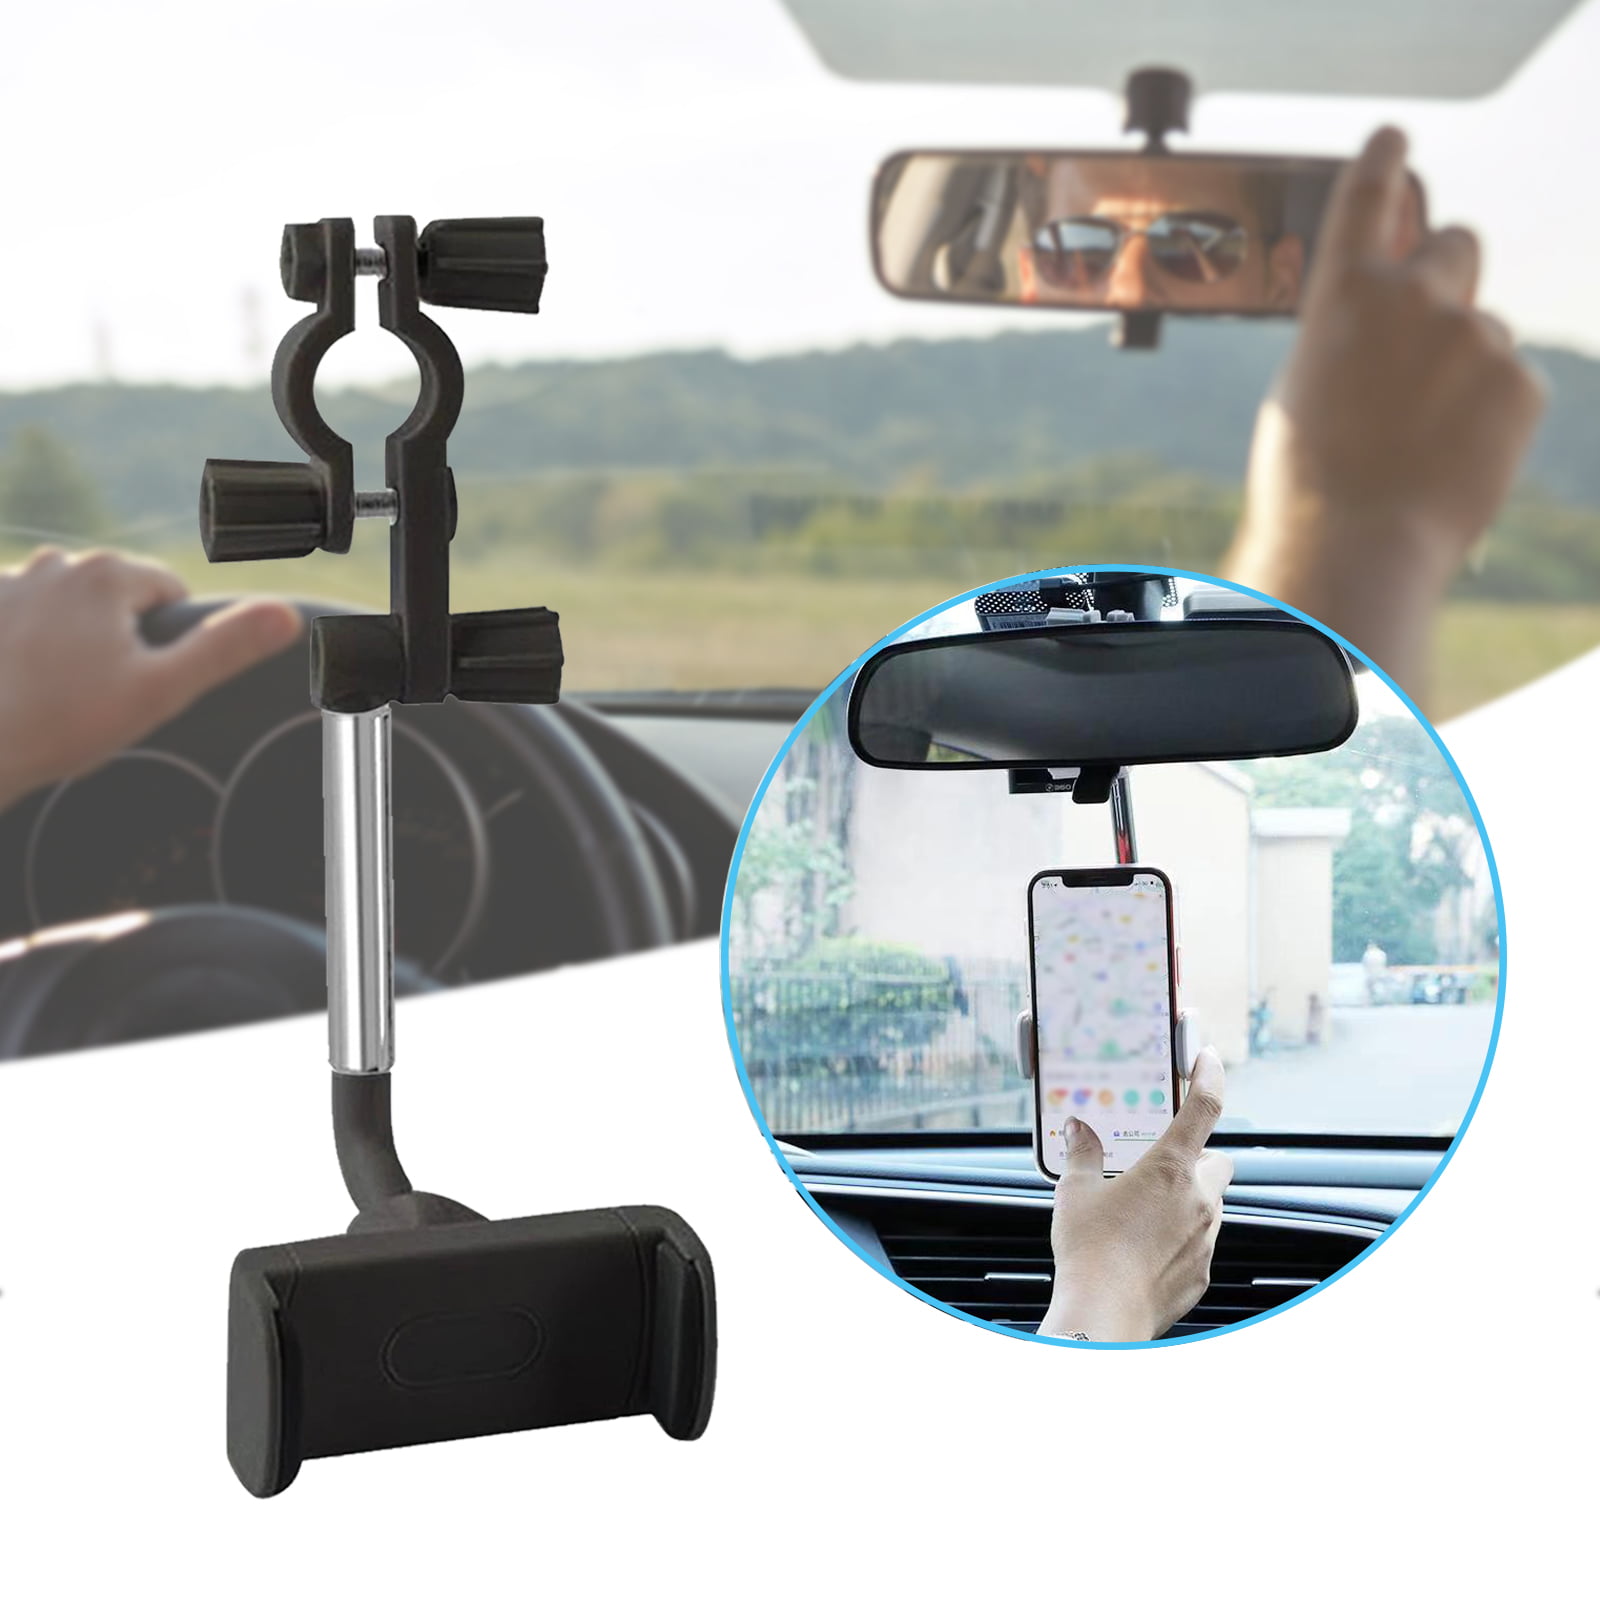 Car SUV Rearview Mirror Mount Stand Holder Cradle Accessories For Cell Phone GPS